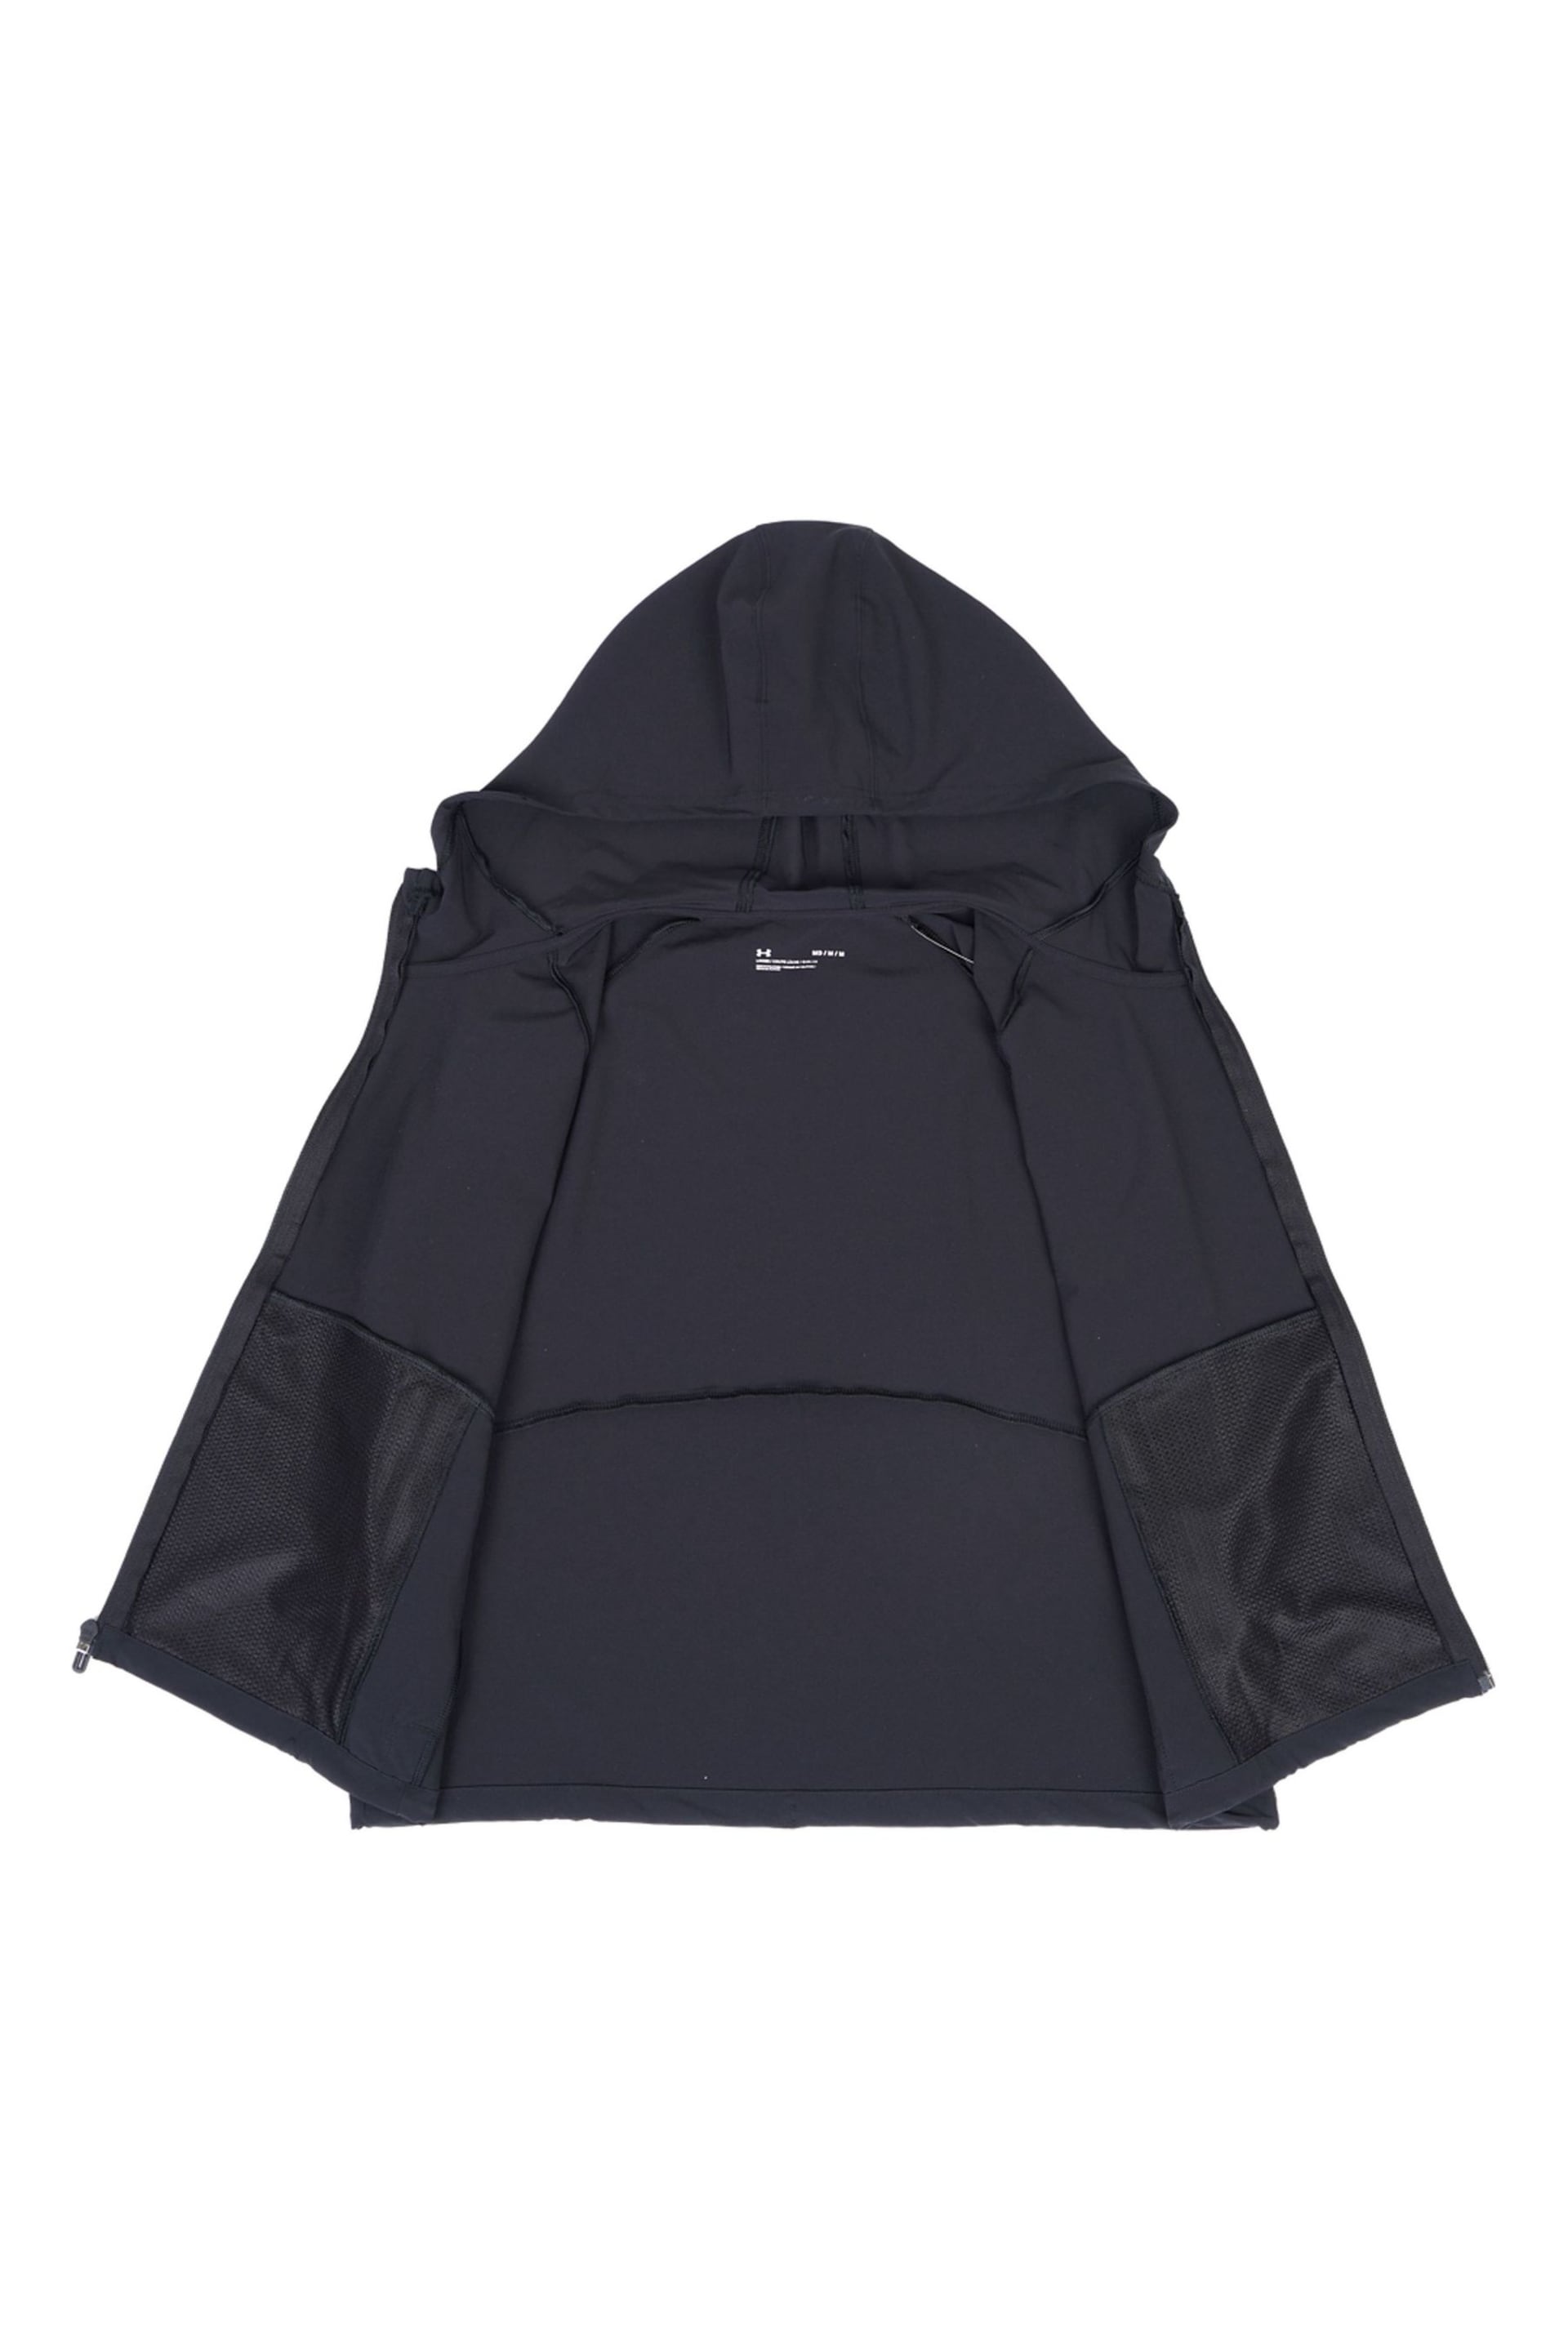 Under Armour Outrun The Storm Black Jacket - Image 14 of 19